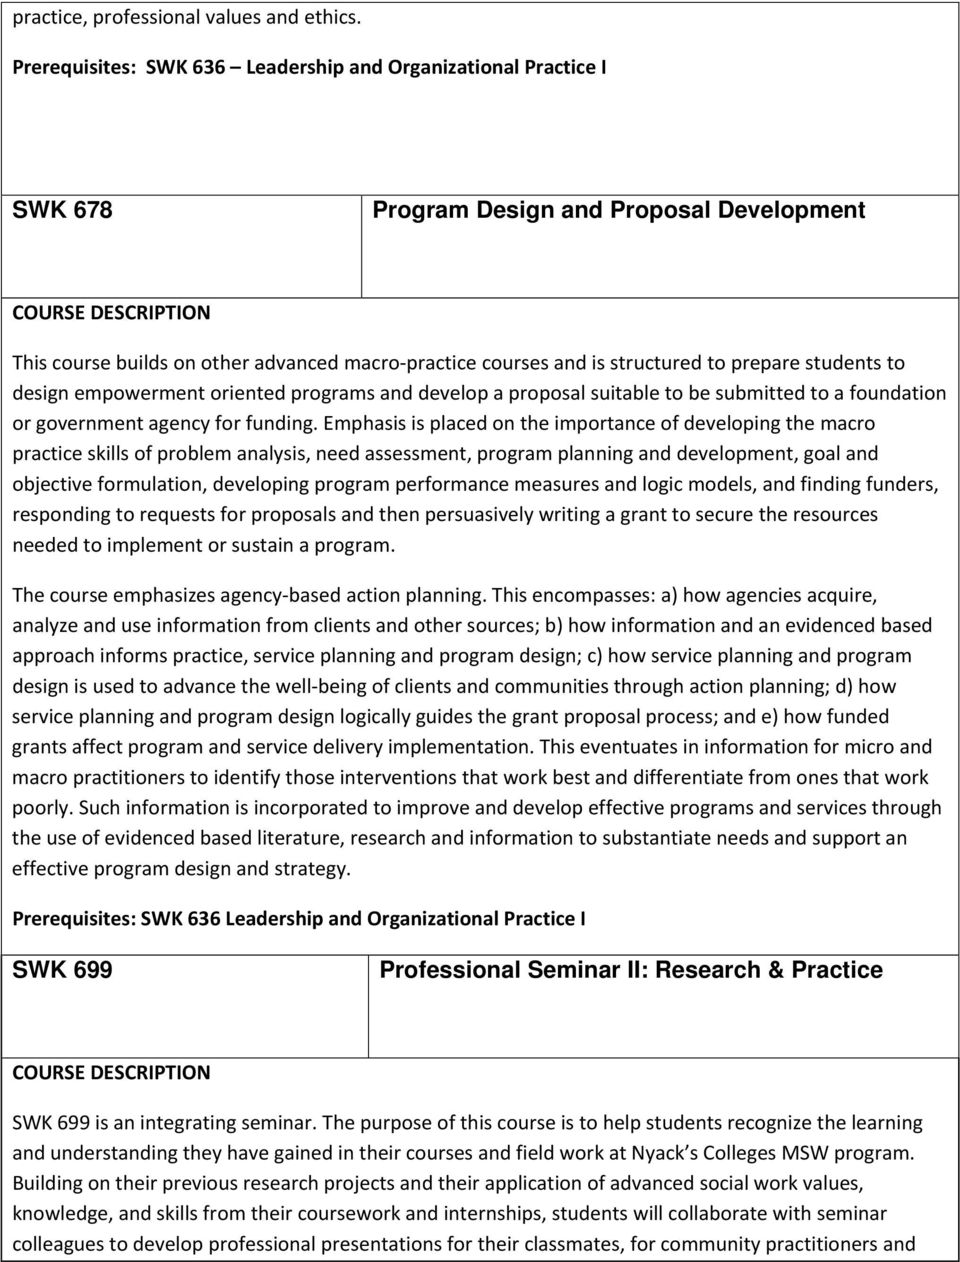 prepare students to design empowerment oriented programs and develop a proposal suitable to be submitted to a foundation or government agency for funding.